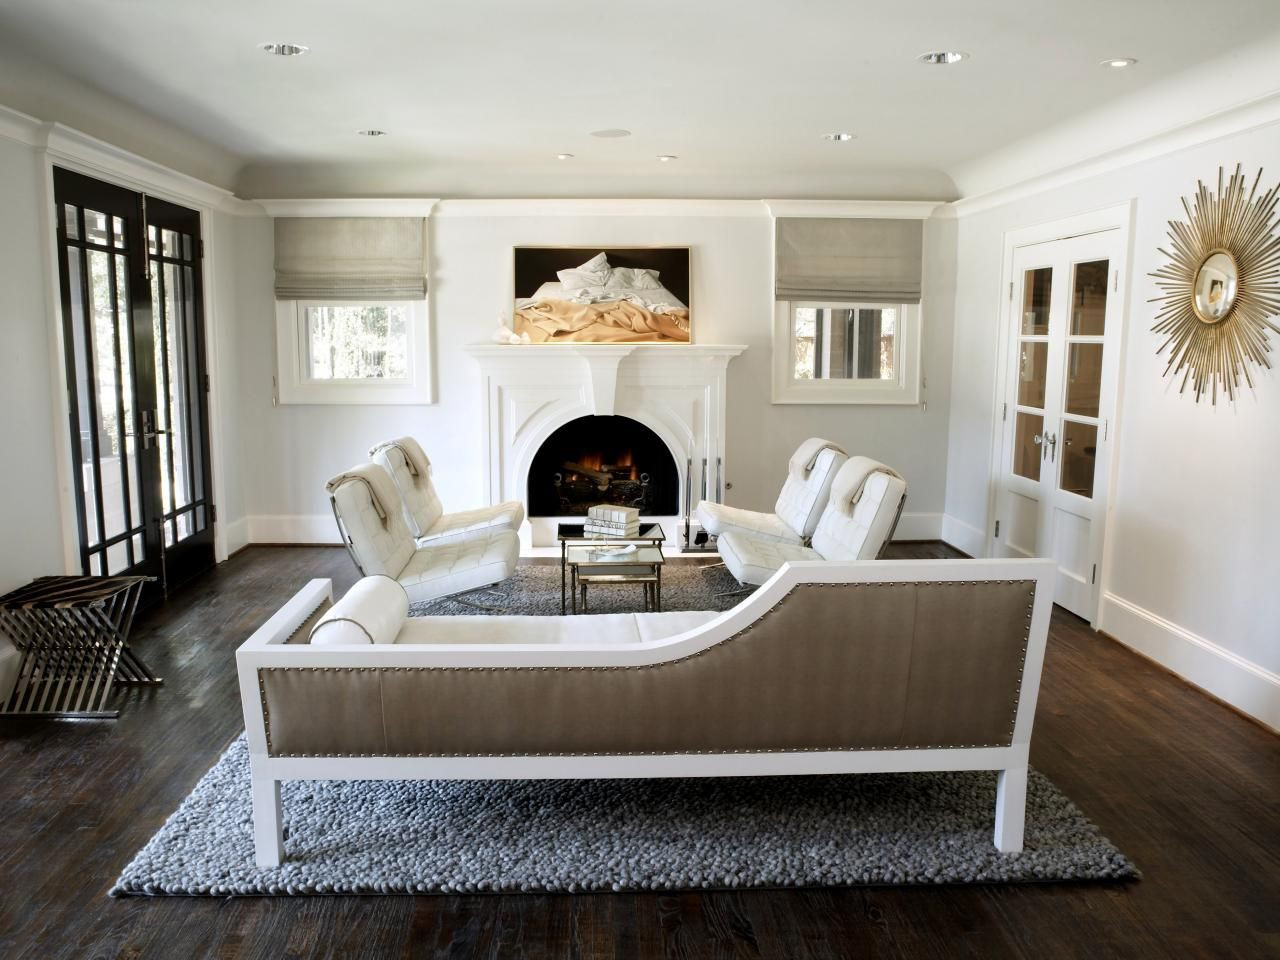 Neutral Colors For Living Room
 A Guide To Using Neutral Colors In the Home